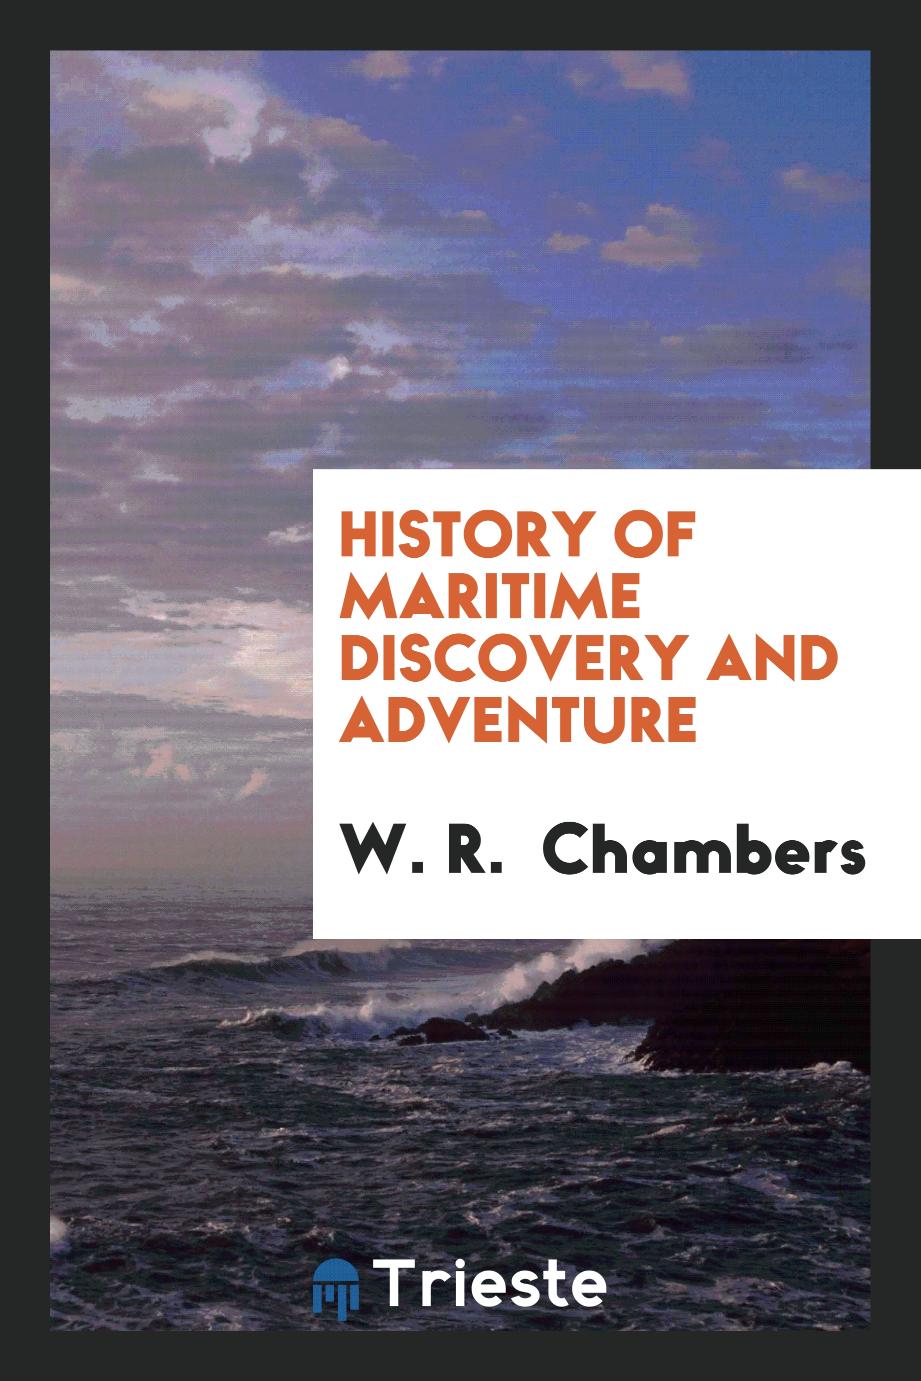 History of maritime discovery and adventure